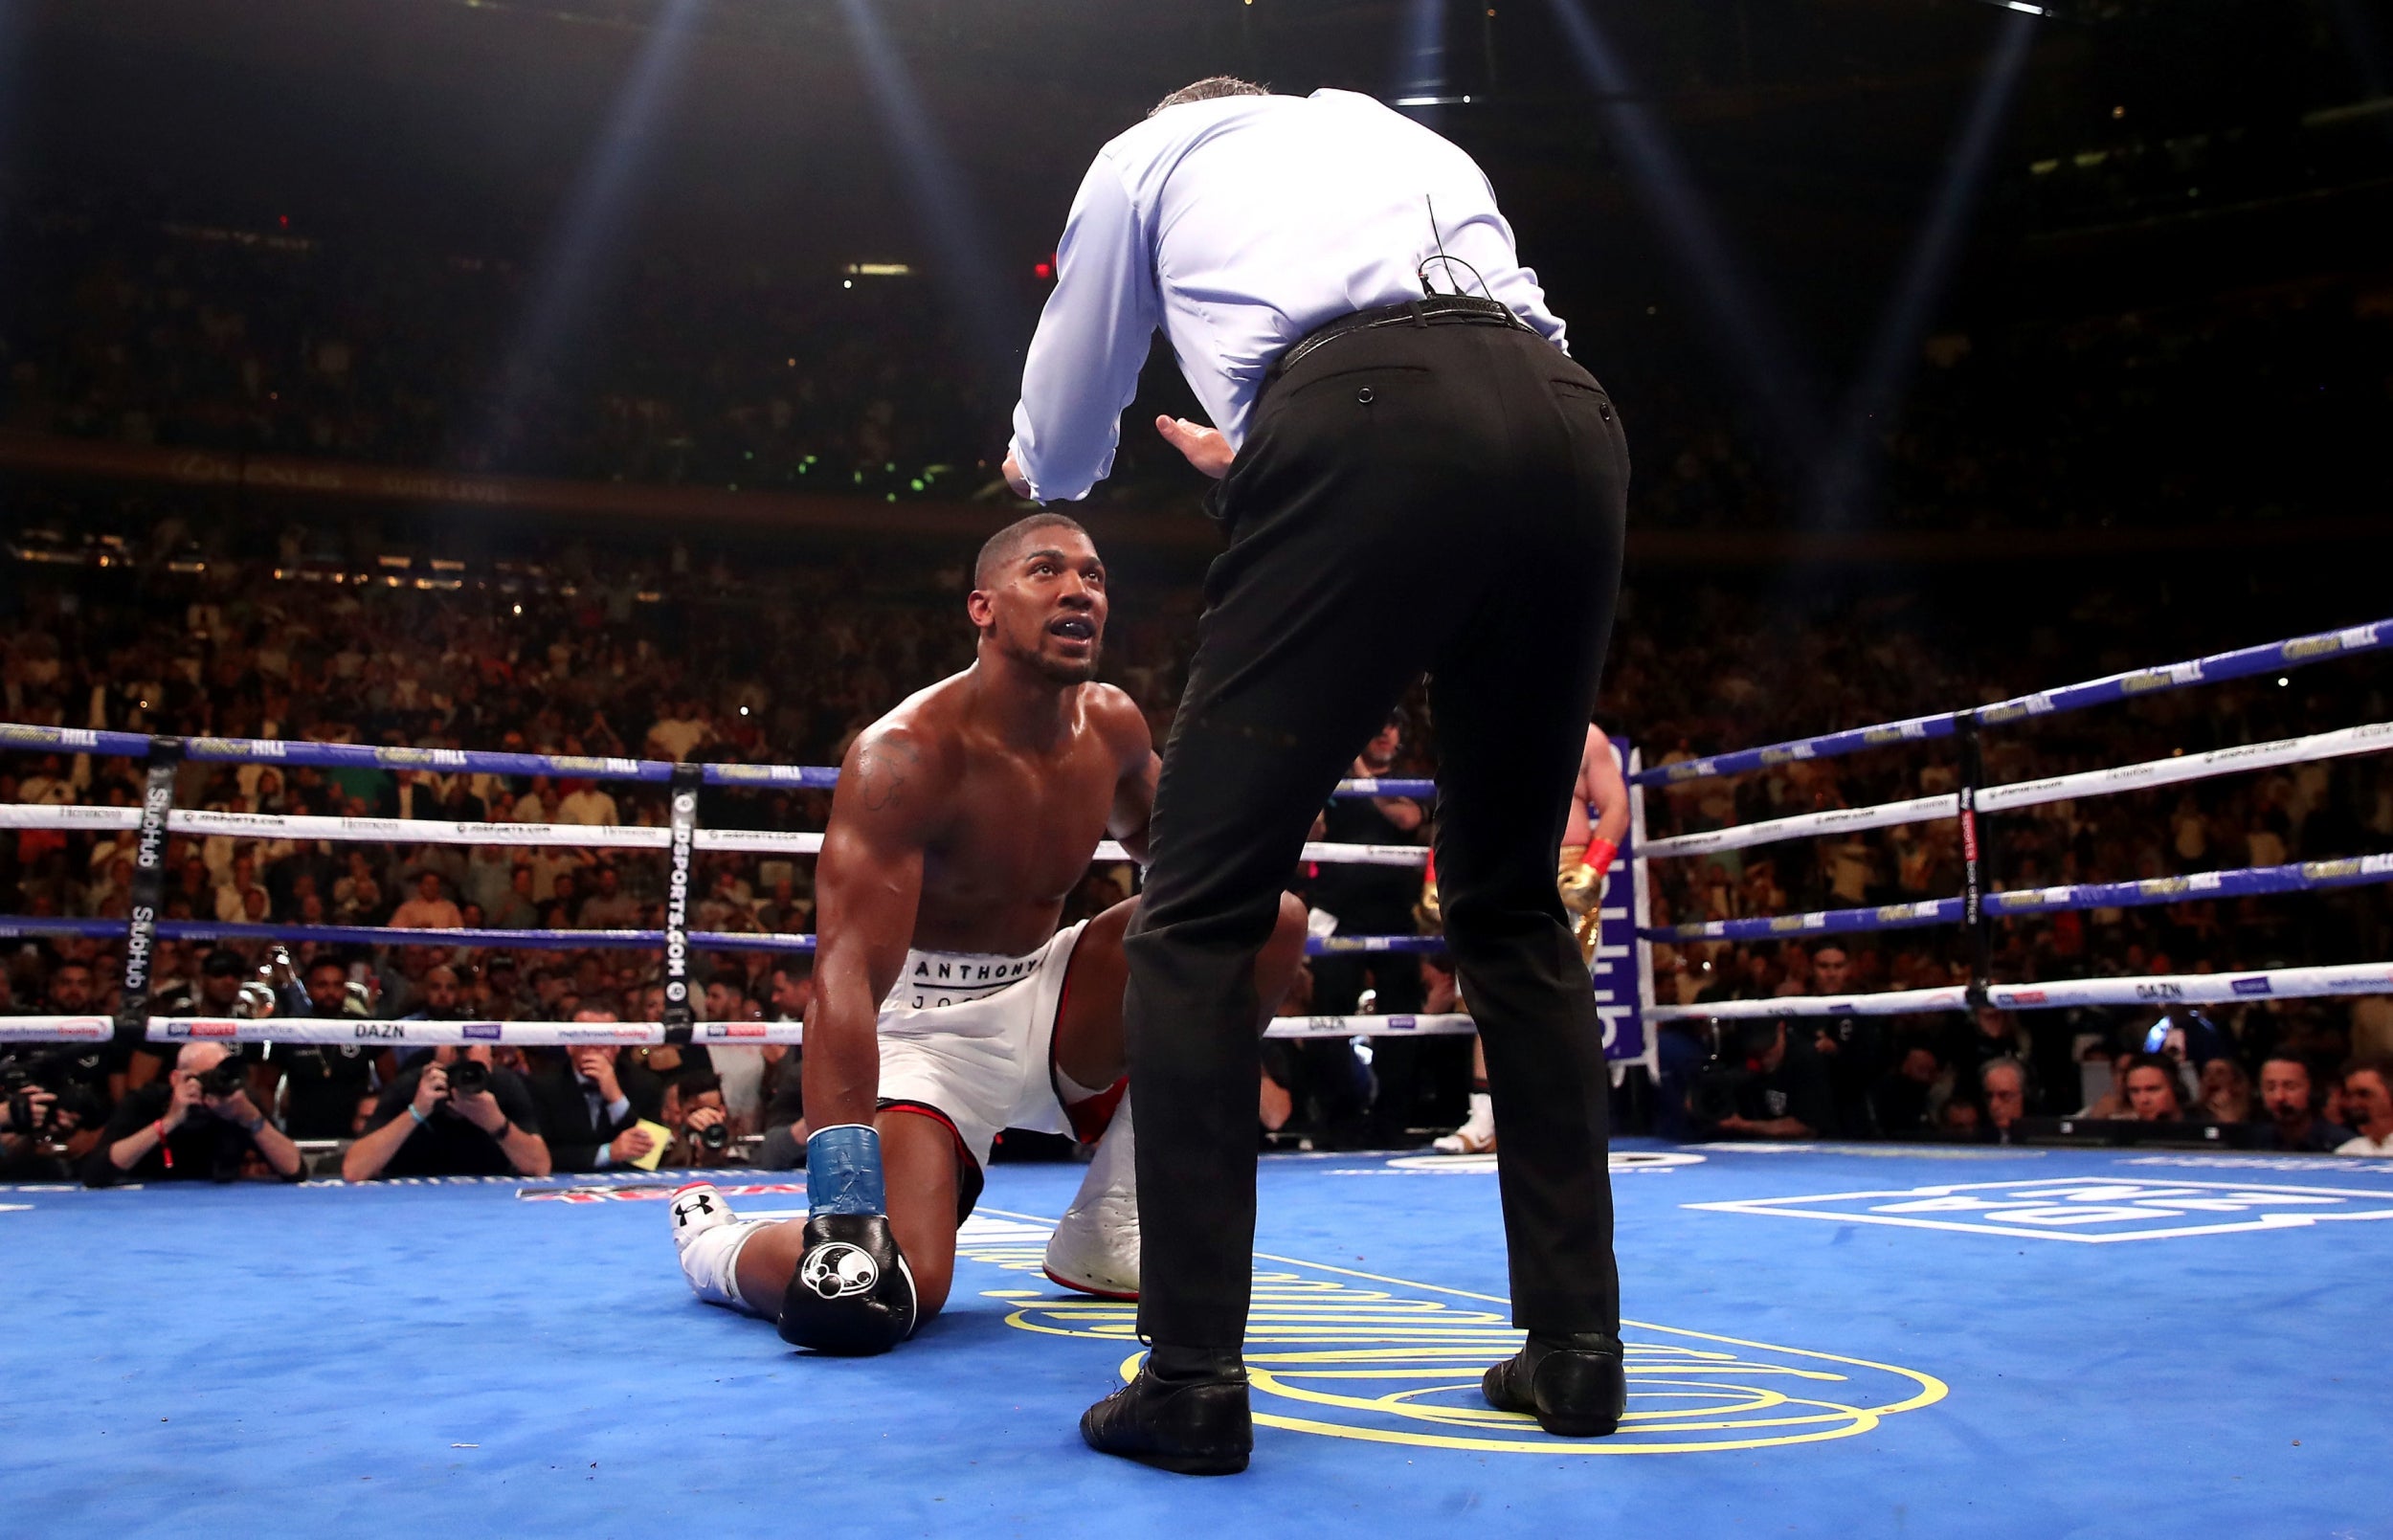 Joshua was too dazed to respond to the referee's instructions